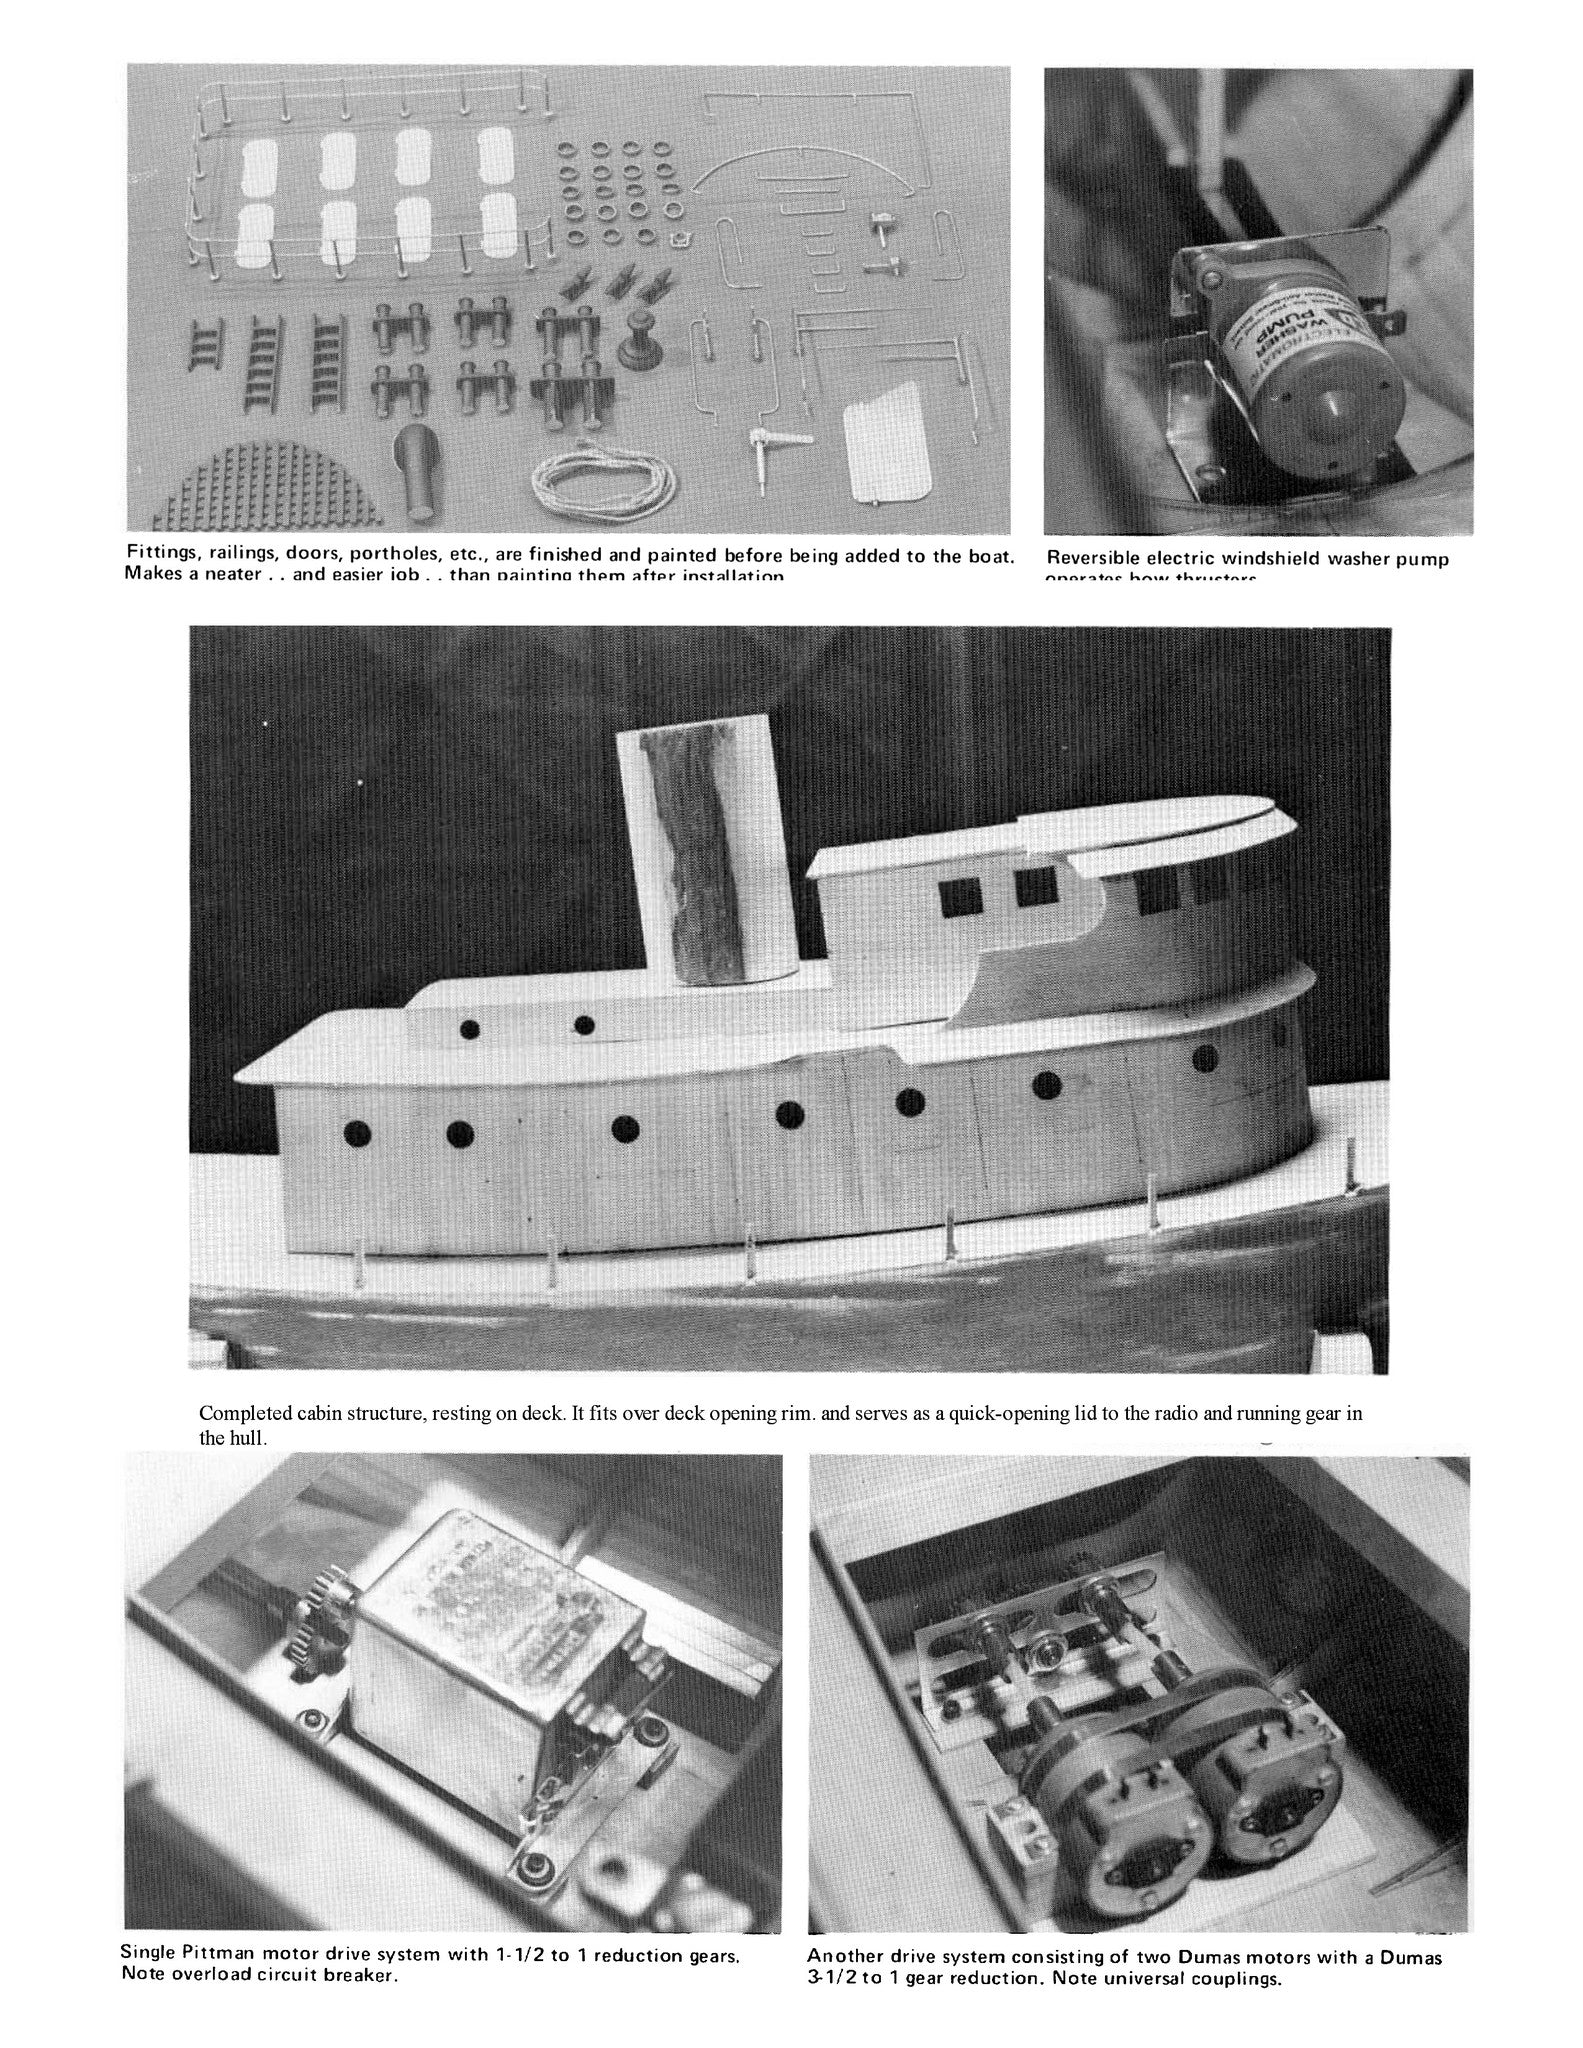 full size printed plan to buils a ww ii army 85' tug boat scale 1:28 l 37" for radio control